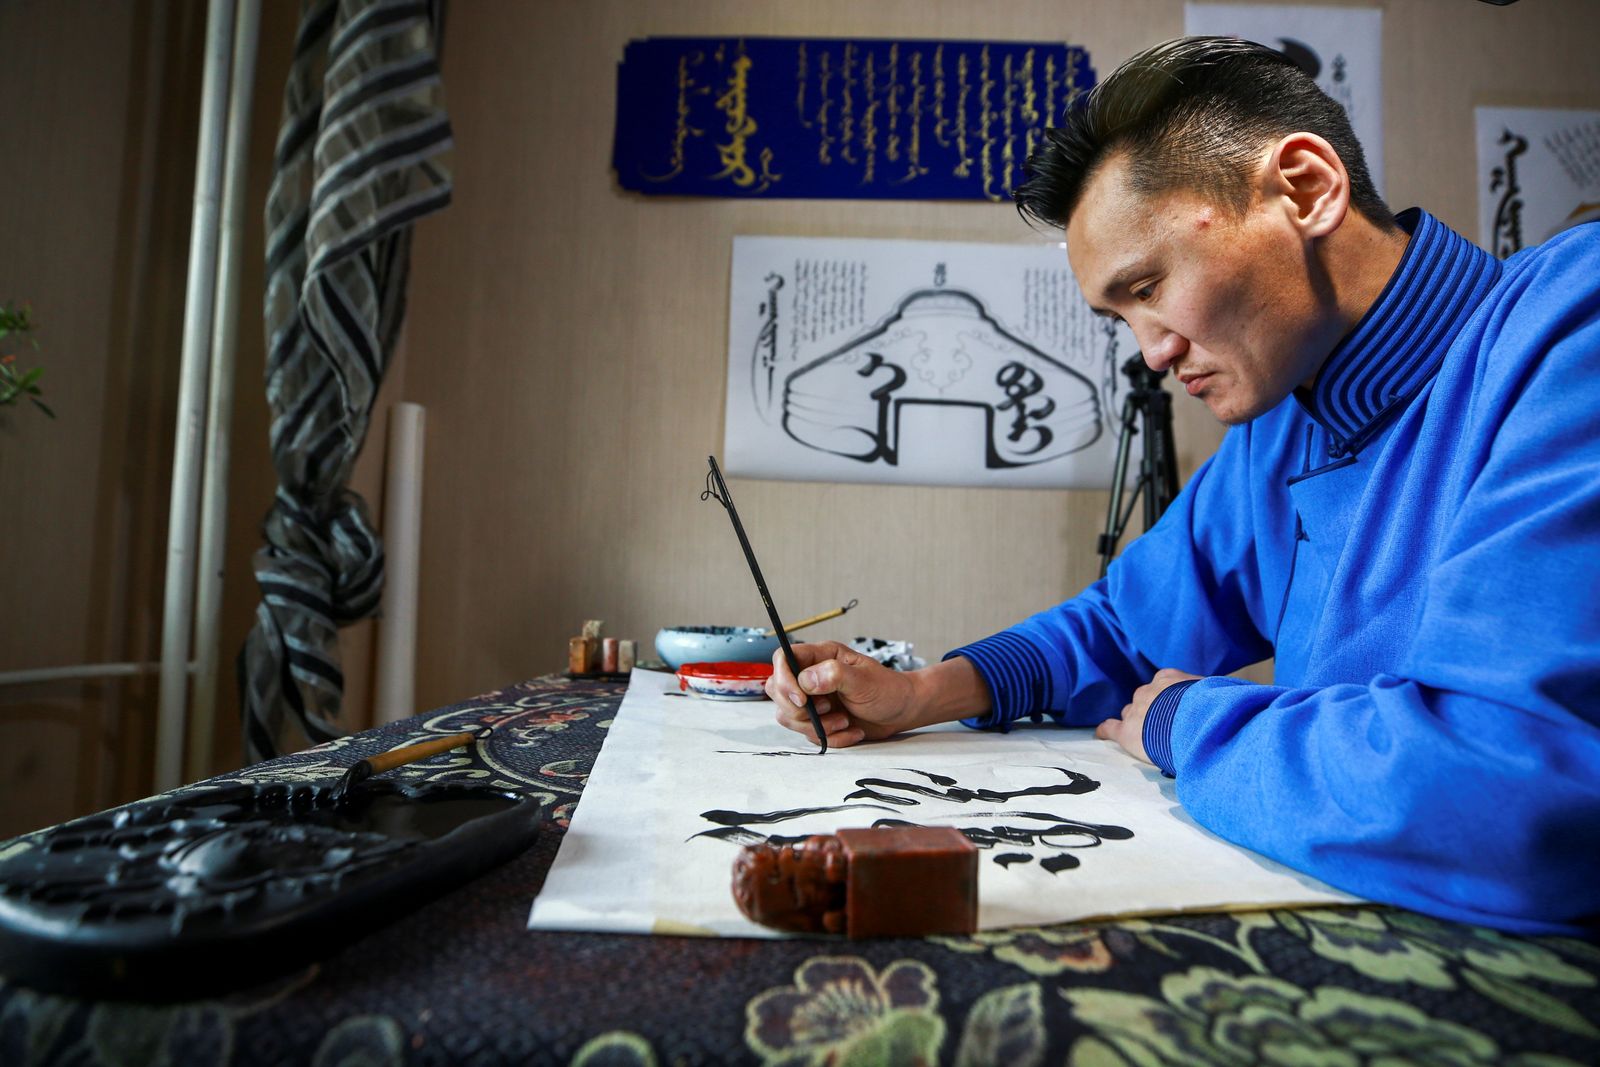 This photo taken on Novemver 3, 2020 shows calligrapher Ganzorig Gulguu, who earned money by selling his calligraphy art work mainly to Inner Mongolia, writing Mongolian scripts at his home in Ulaanbaatar, the capital of Mongolia. (Photo by Byambasuren BYAMBA-OCHIR / AFP) - AFP